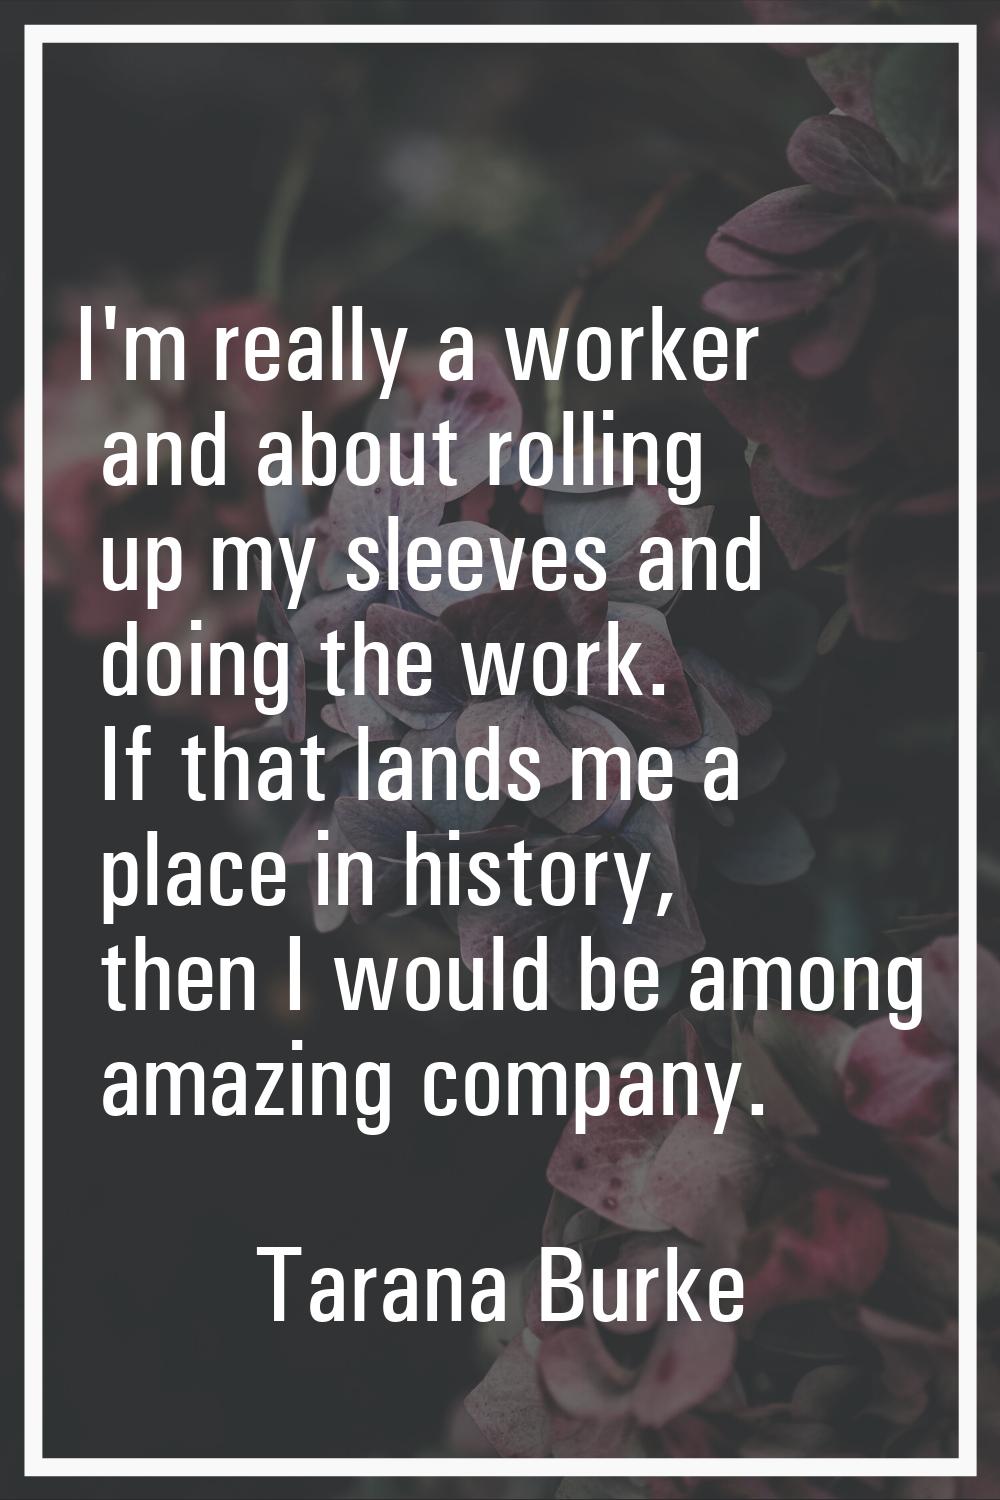 I'm really a worker and about rolling up my sleeves and doing the work. If that lands me a place in